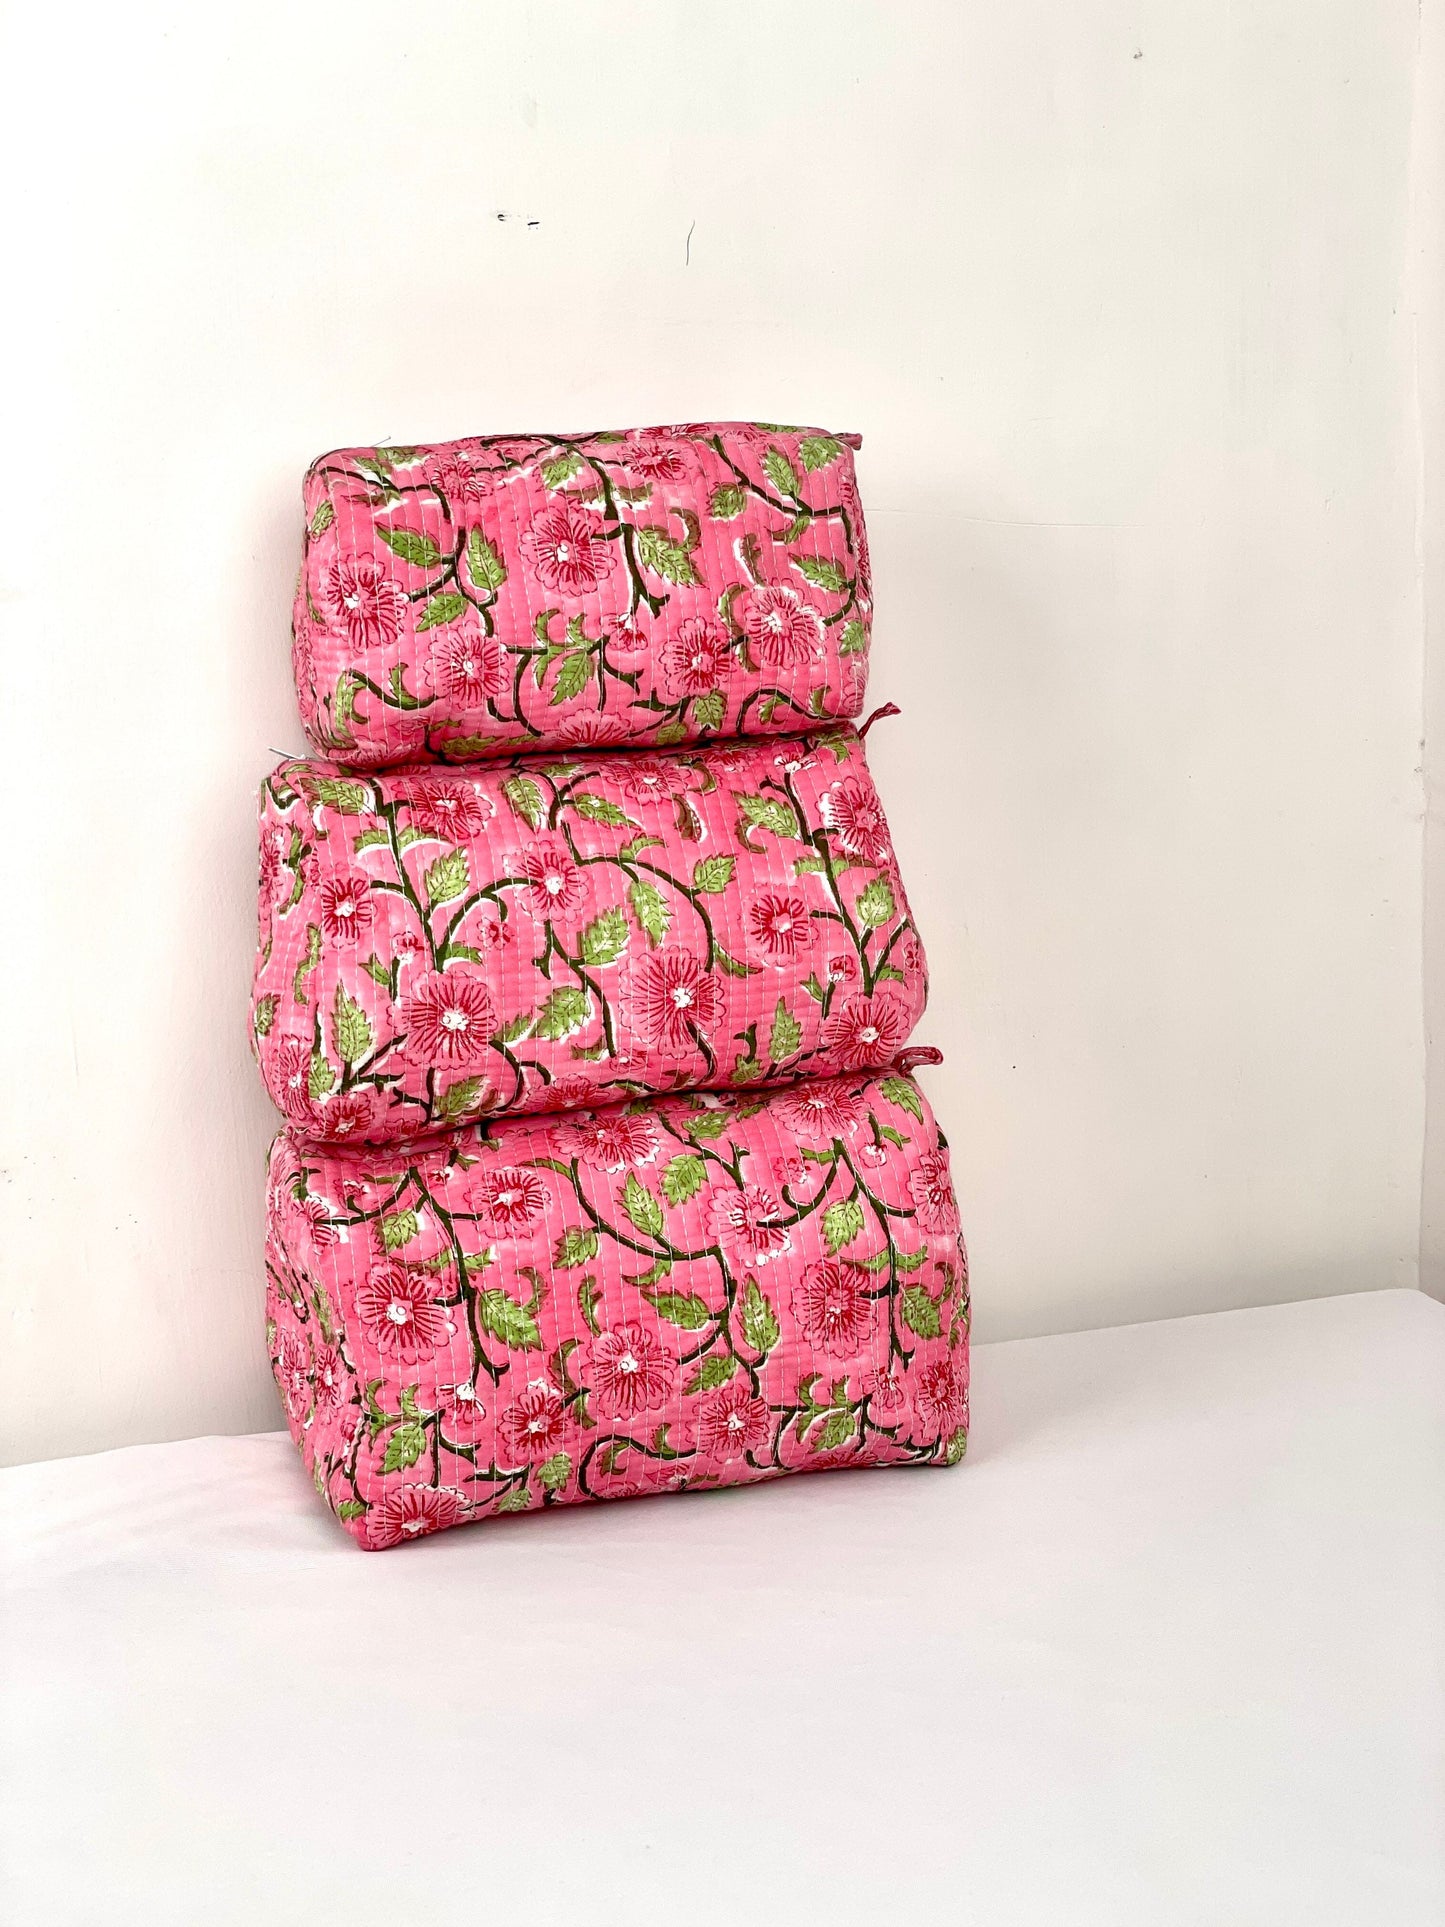 Pack of 3 Organic Cotton Quilted Toiletry Bag, Elegant Floral Hand block Print Wash Bag, Pink Makeup Bag, Gift for her, Mother's Day Gift